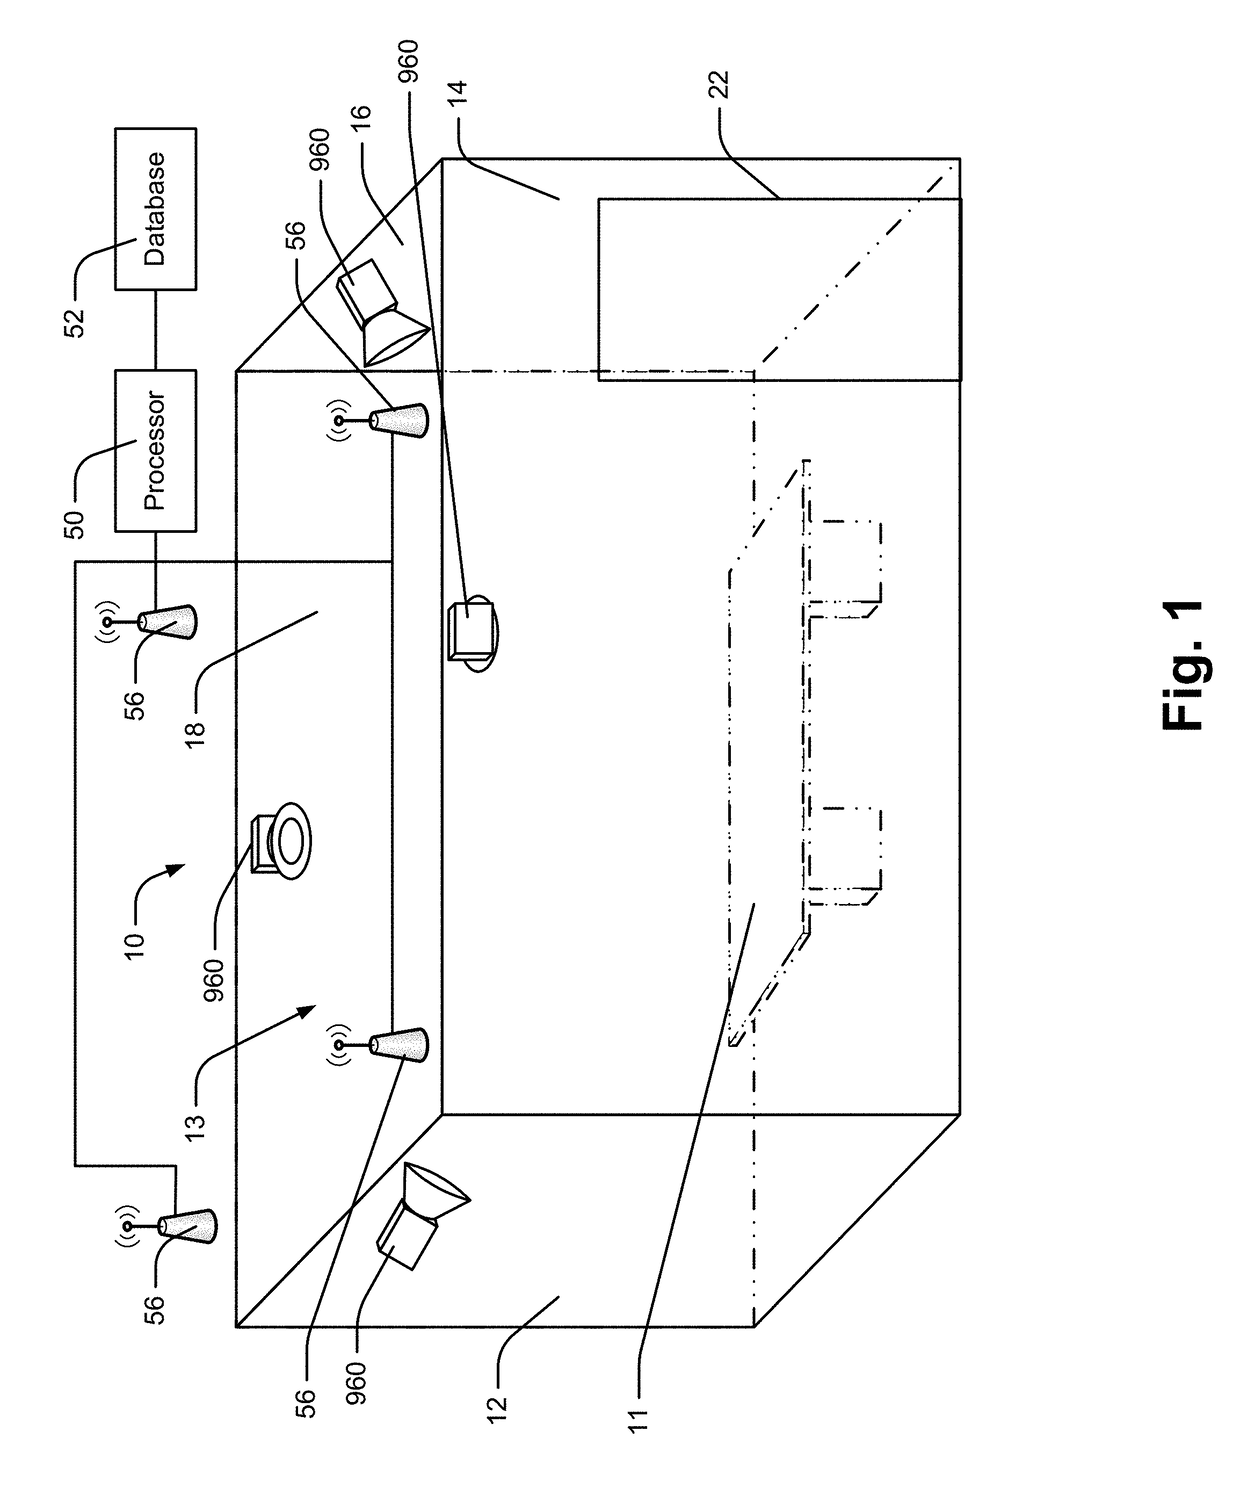 Emissive surfaces and workspaces method and apparatus